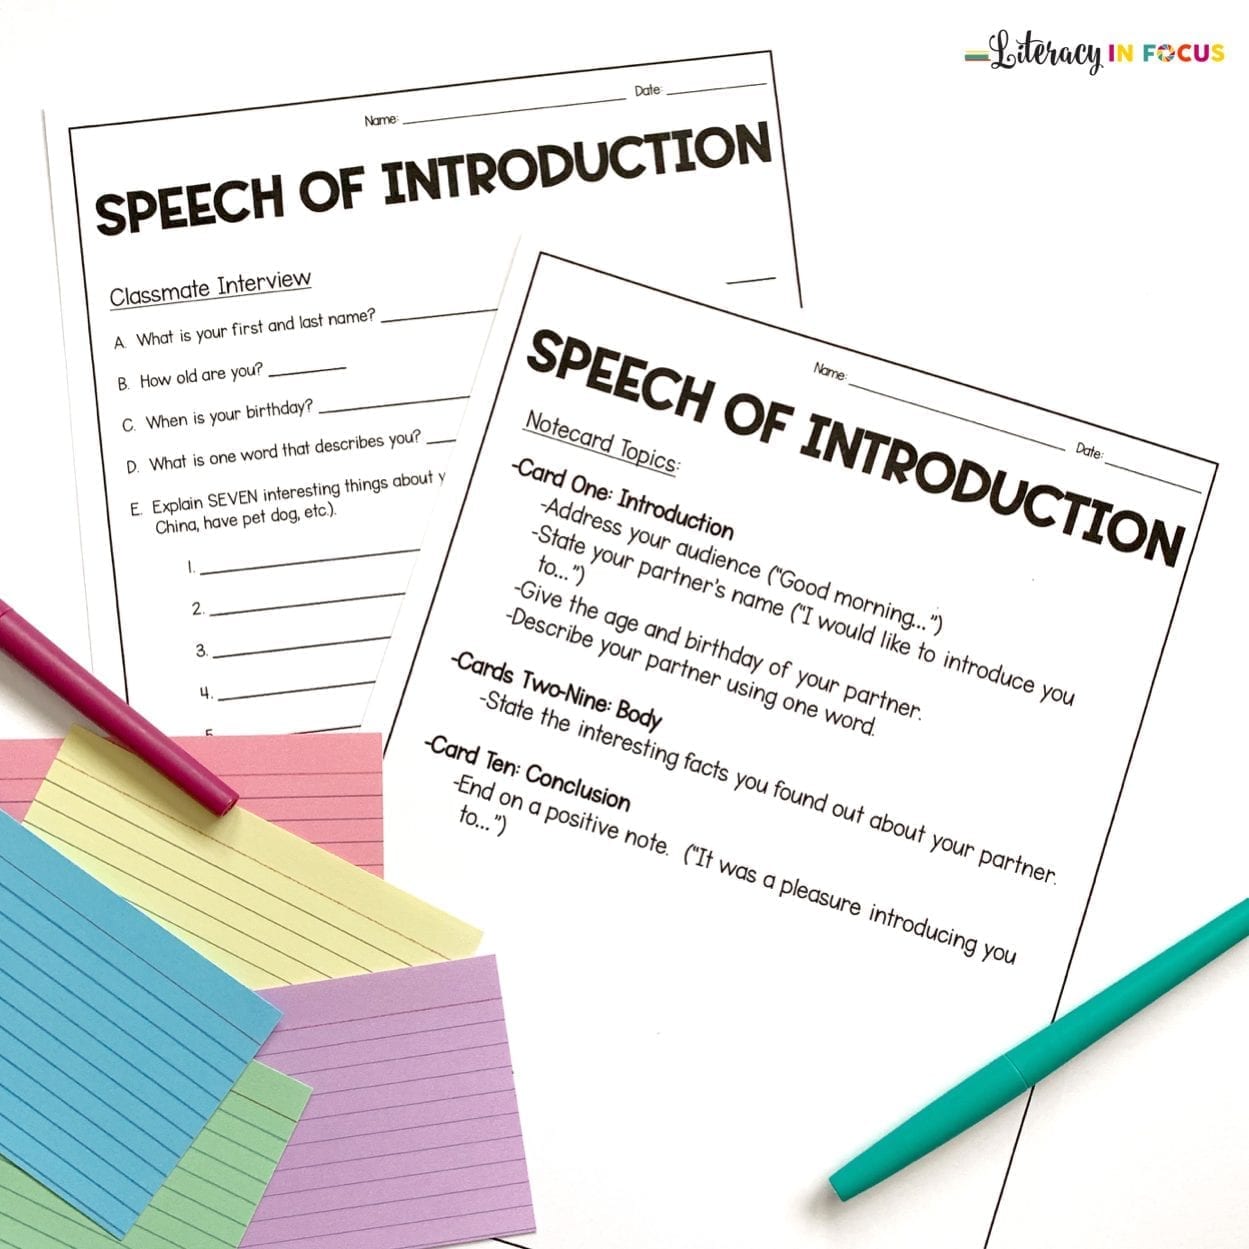 a speech introduction is designed to